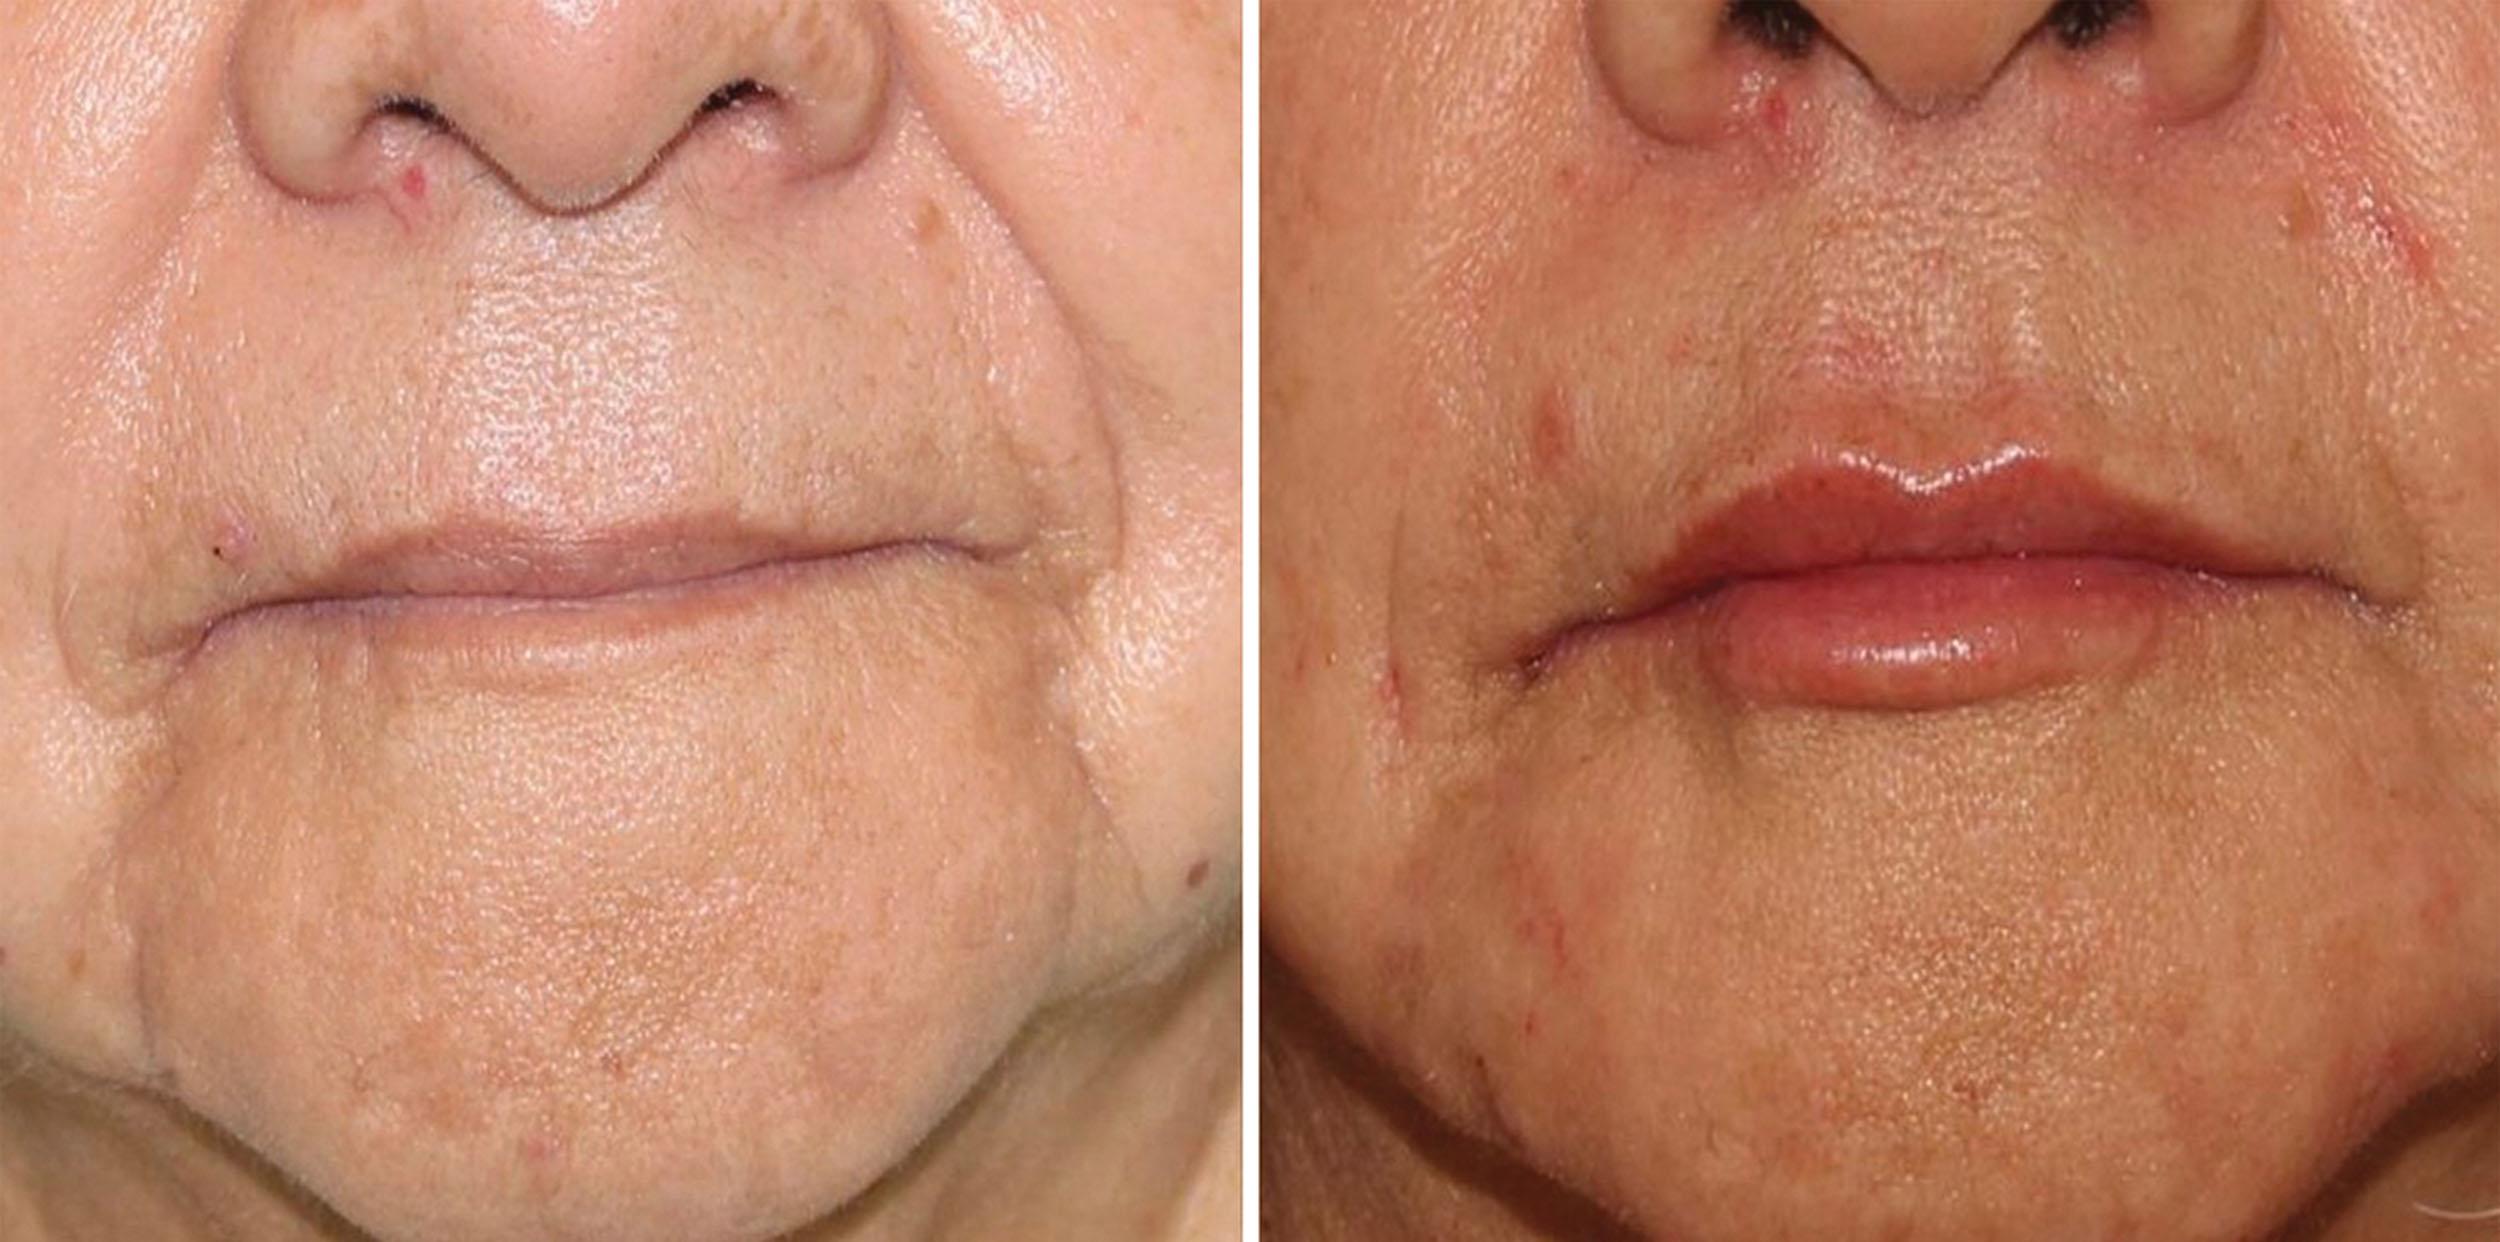 Fig. 10.62, This 79-year-old patient presented with a photo of Khloé Kardashian’s lips from a magazine and requested that result. Although she did not accomplish that fullness, she was happy with her first-ever lip injection and will return in 1 month for another. An additional 2 mL were used to treat the nasolabial folds and oral commissure.